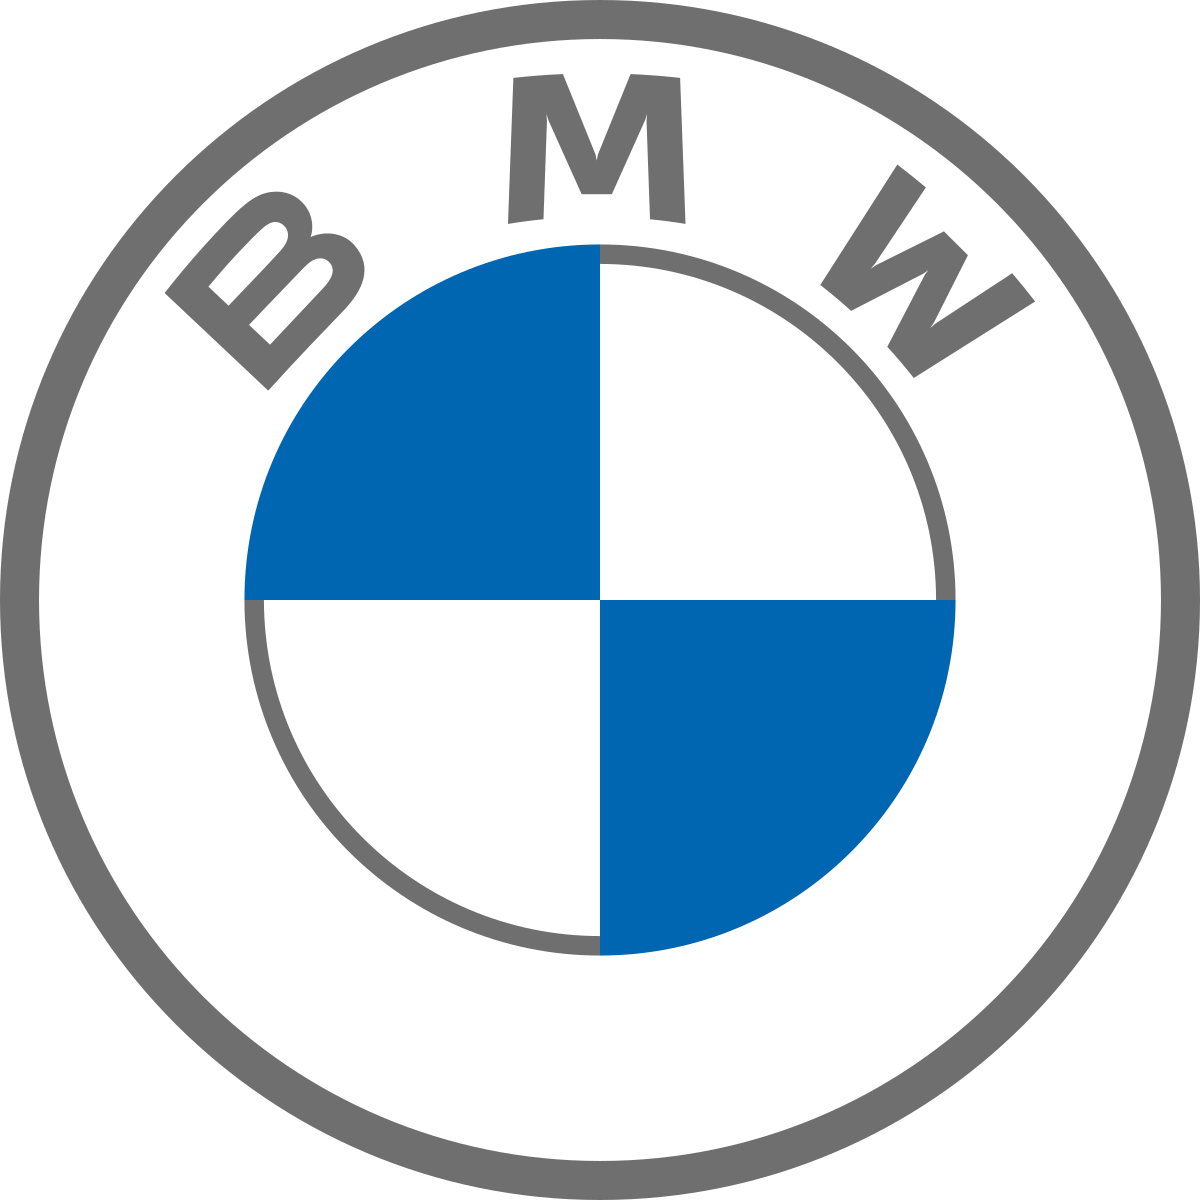 BMW Logo working with Goodyear Tyres